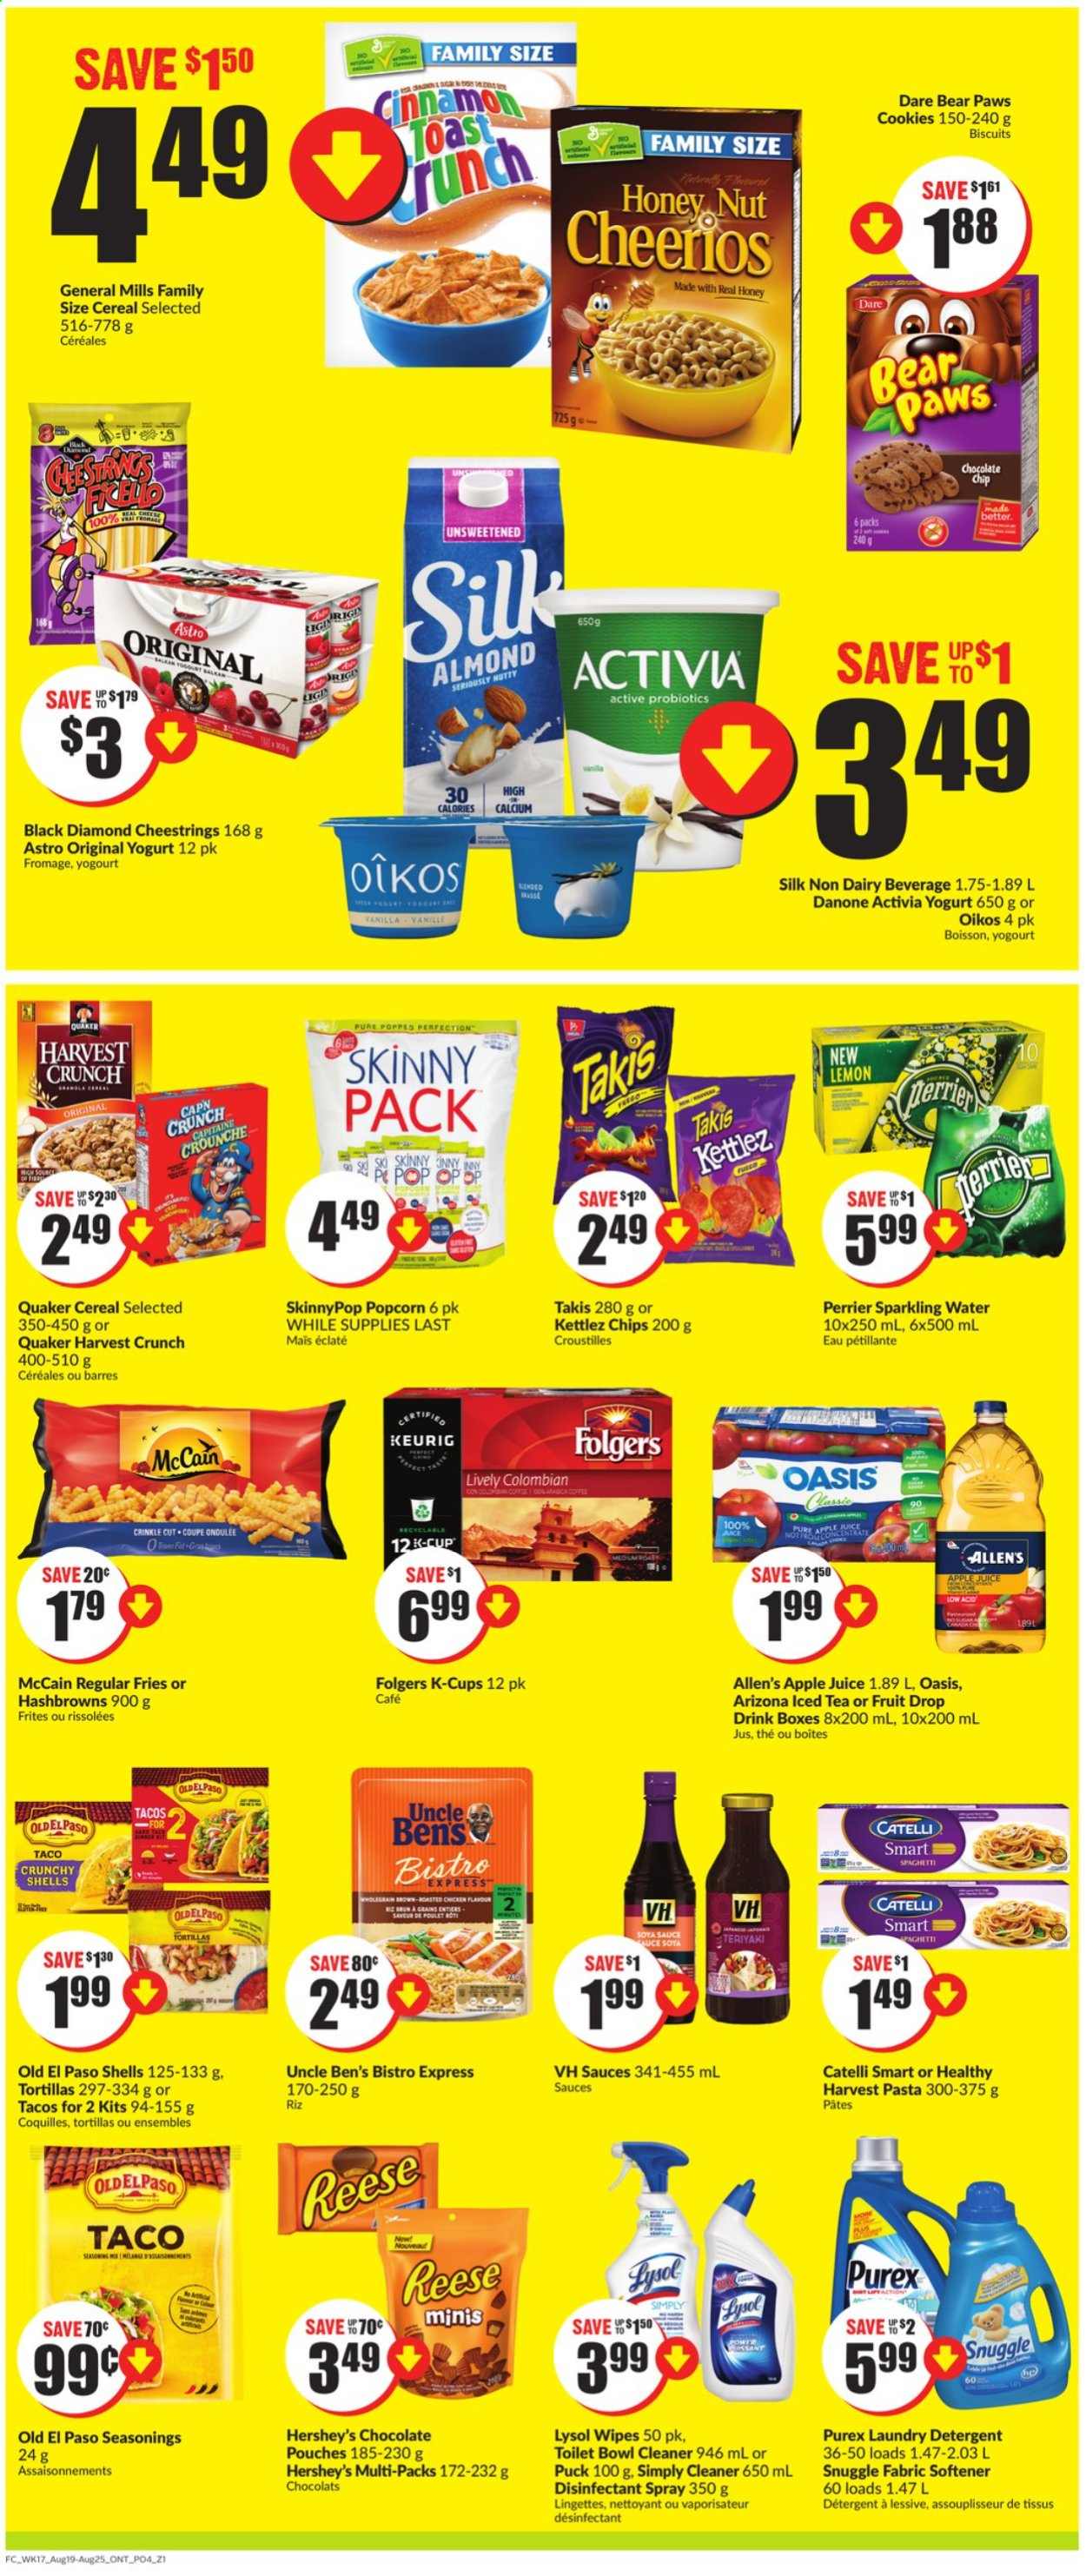 thumbnail - Chalo! FreshCo. Flyer - August 19, 2021 - August 25, 2021 - Sales products - tortillas, Old El Paso, tacos, pasta, Quaker, Harvest Pasta, string cheese, Puck, yoghurt, Activia, Oikos, Silk, Hershey's, McCain, hash browns, potato fries, cookies, biscuit, popcorn, Uncle Ben's, cereals, Cheerios, soy sauce, apple juice, juice, ice tea, AriZona, Perrier, sparkling water, Folgers, coffee capsules, K-Cups, Keurig, probiotics, antibacterial spray, Danone, chips, desinfection. Page 4.